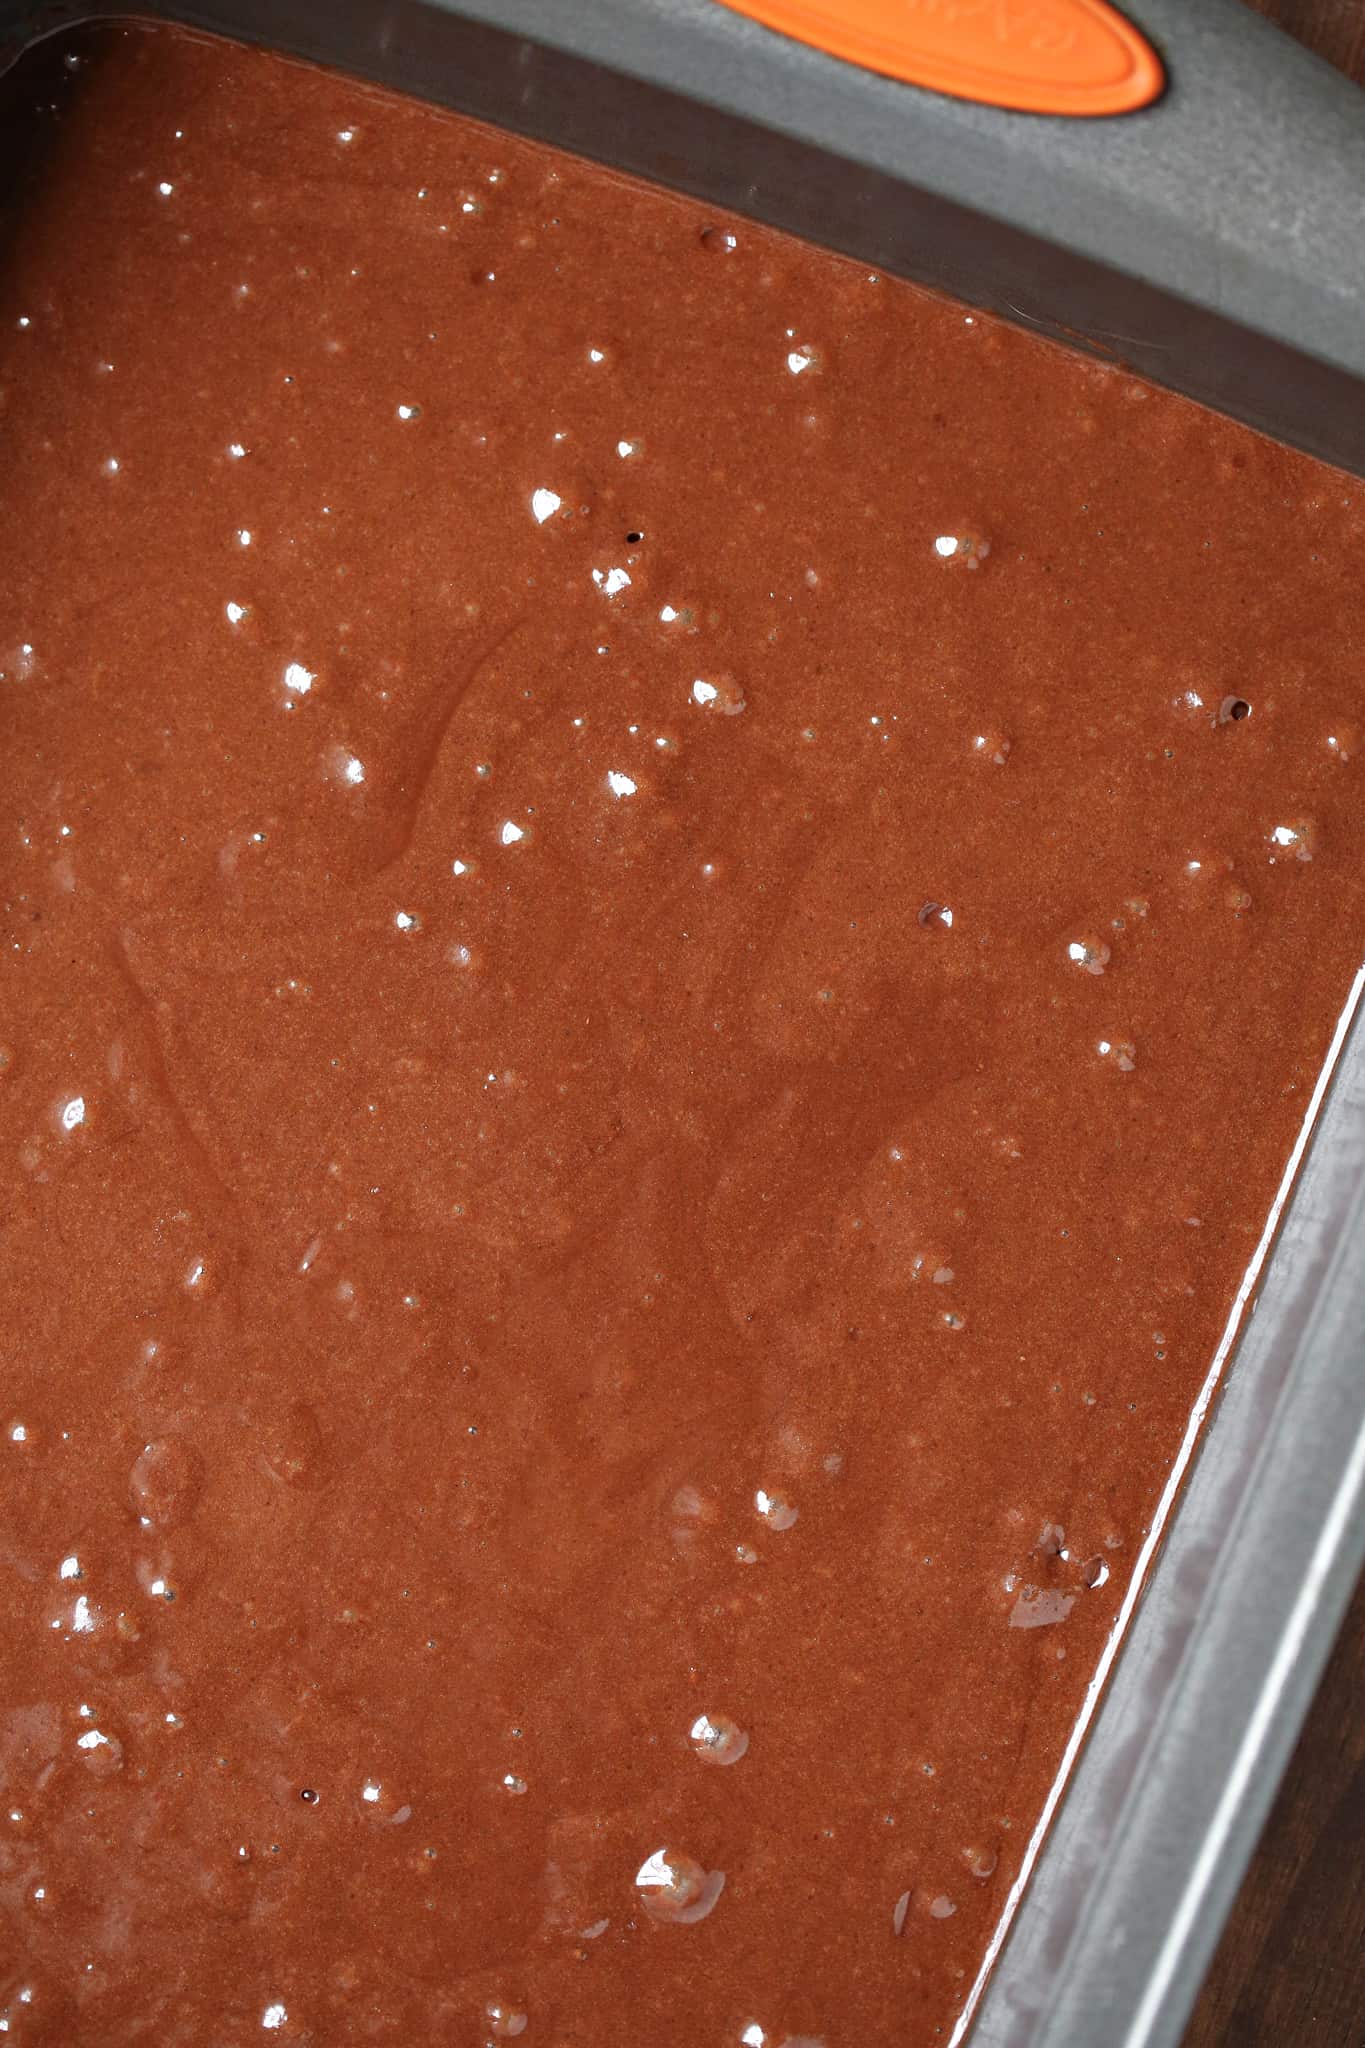 brownie batter poured into baking pan.